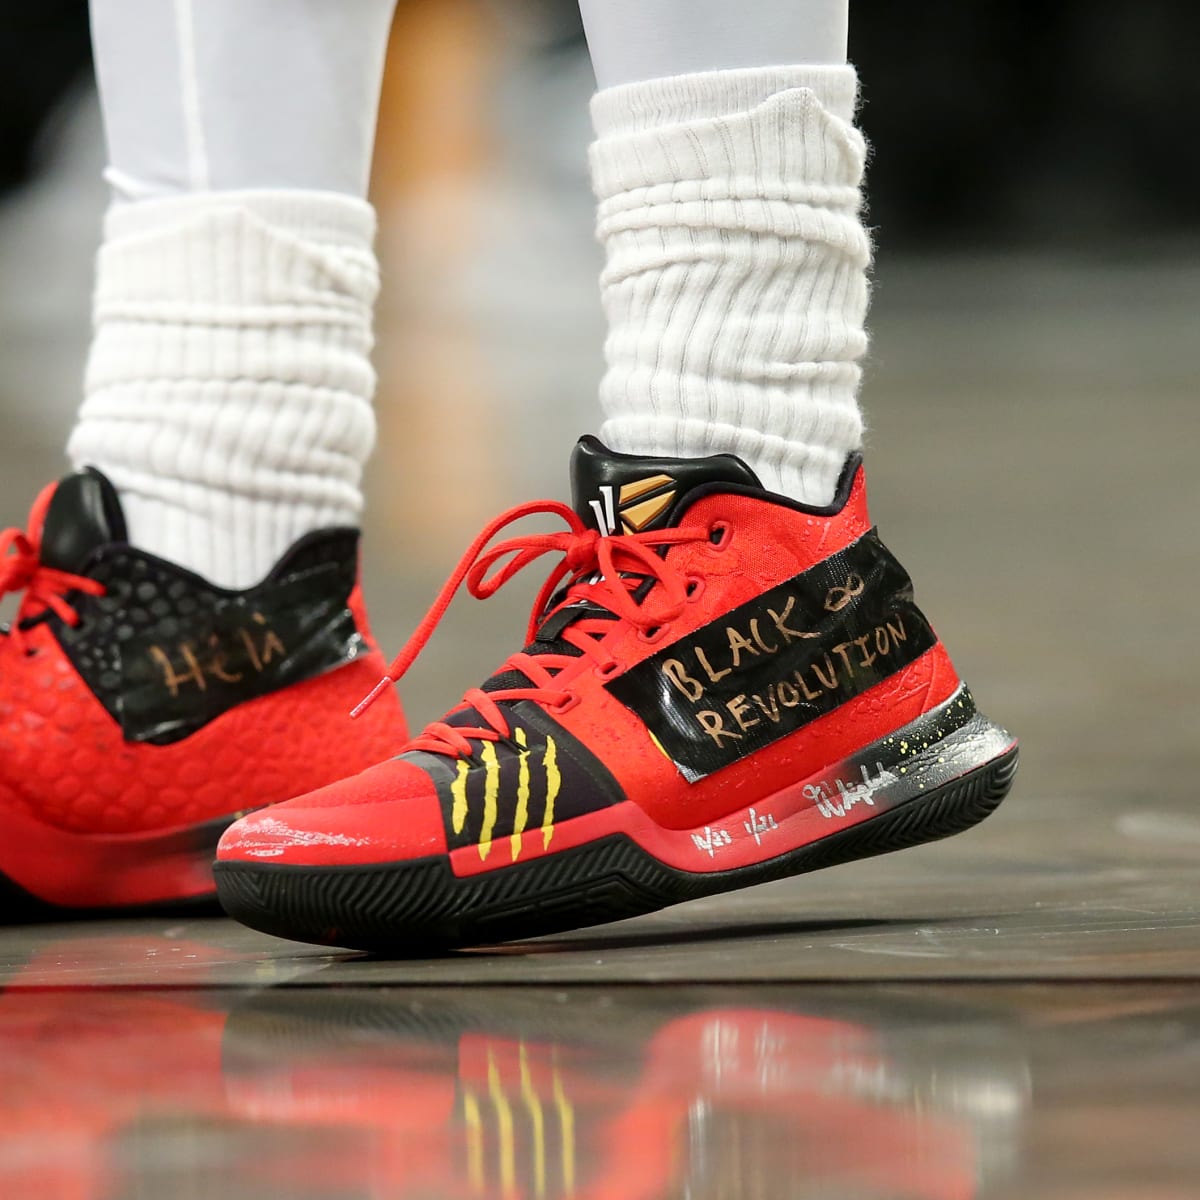 kyrie irving shoes